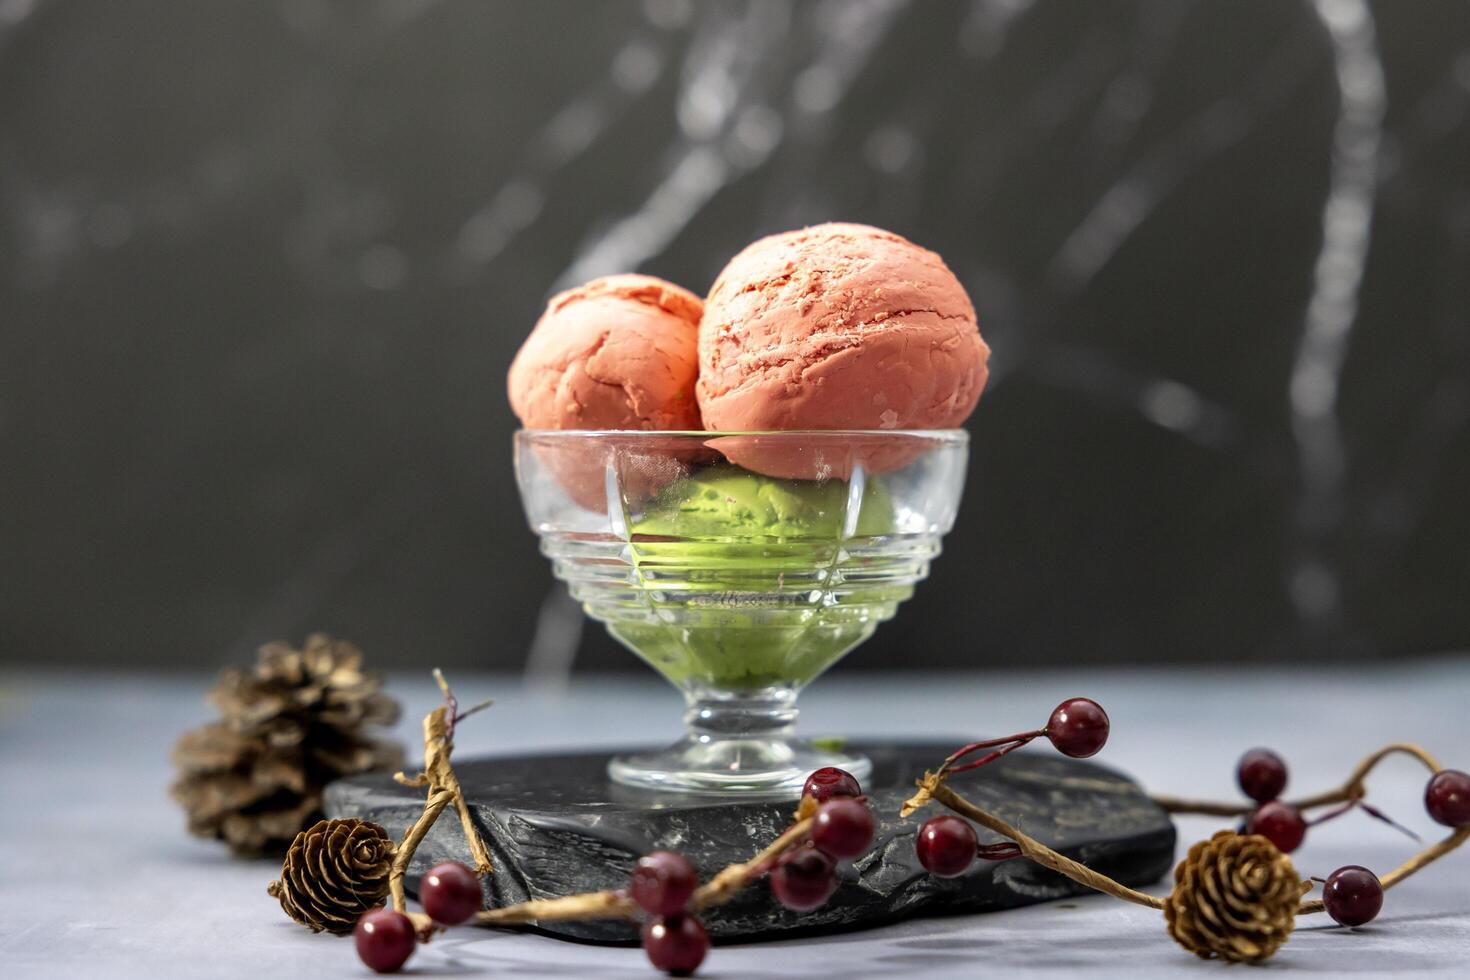 Strawberry and matcha green tea ice cream gelato with red berries and pine cone decoration for winter and christmas dessert concept photo